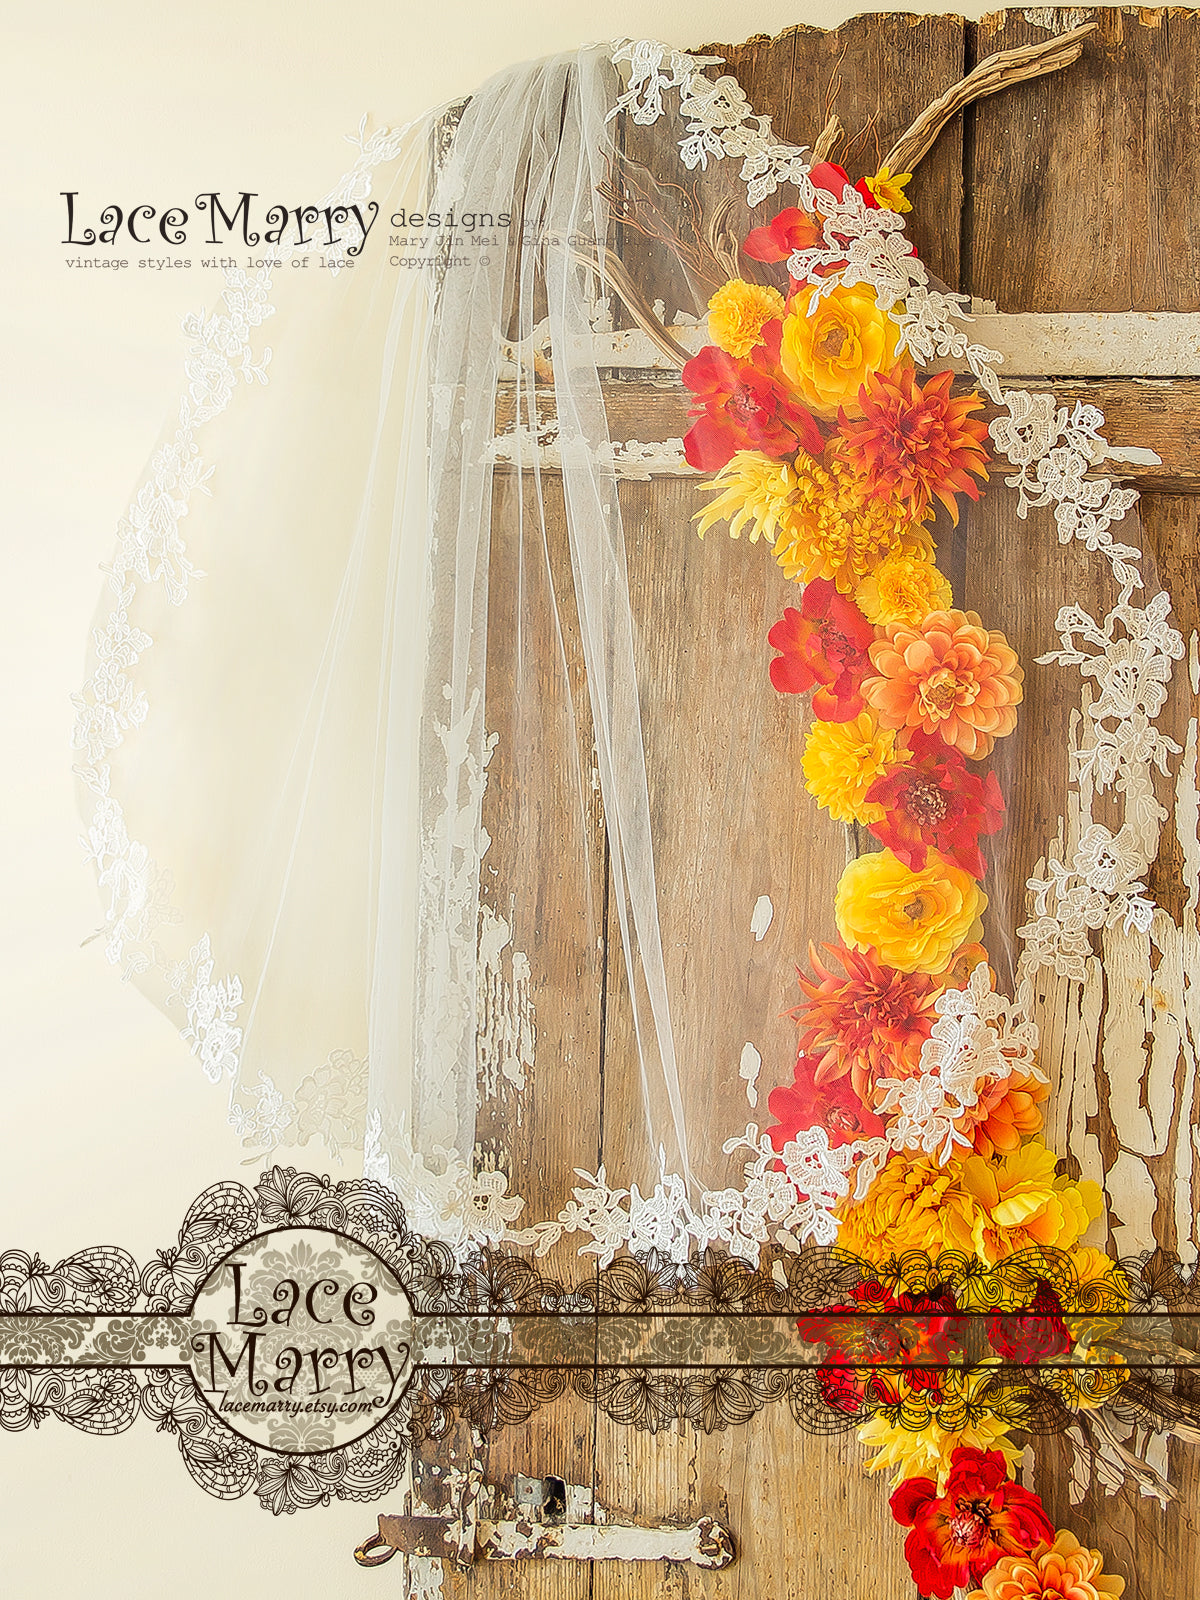 Two tier floral lace wedding veil